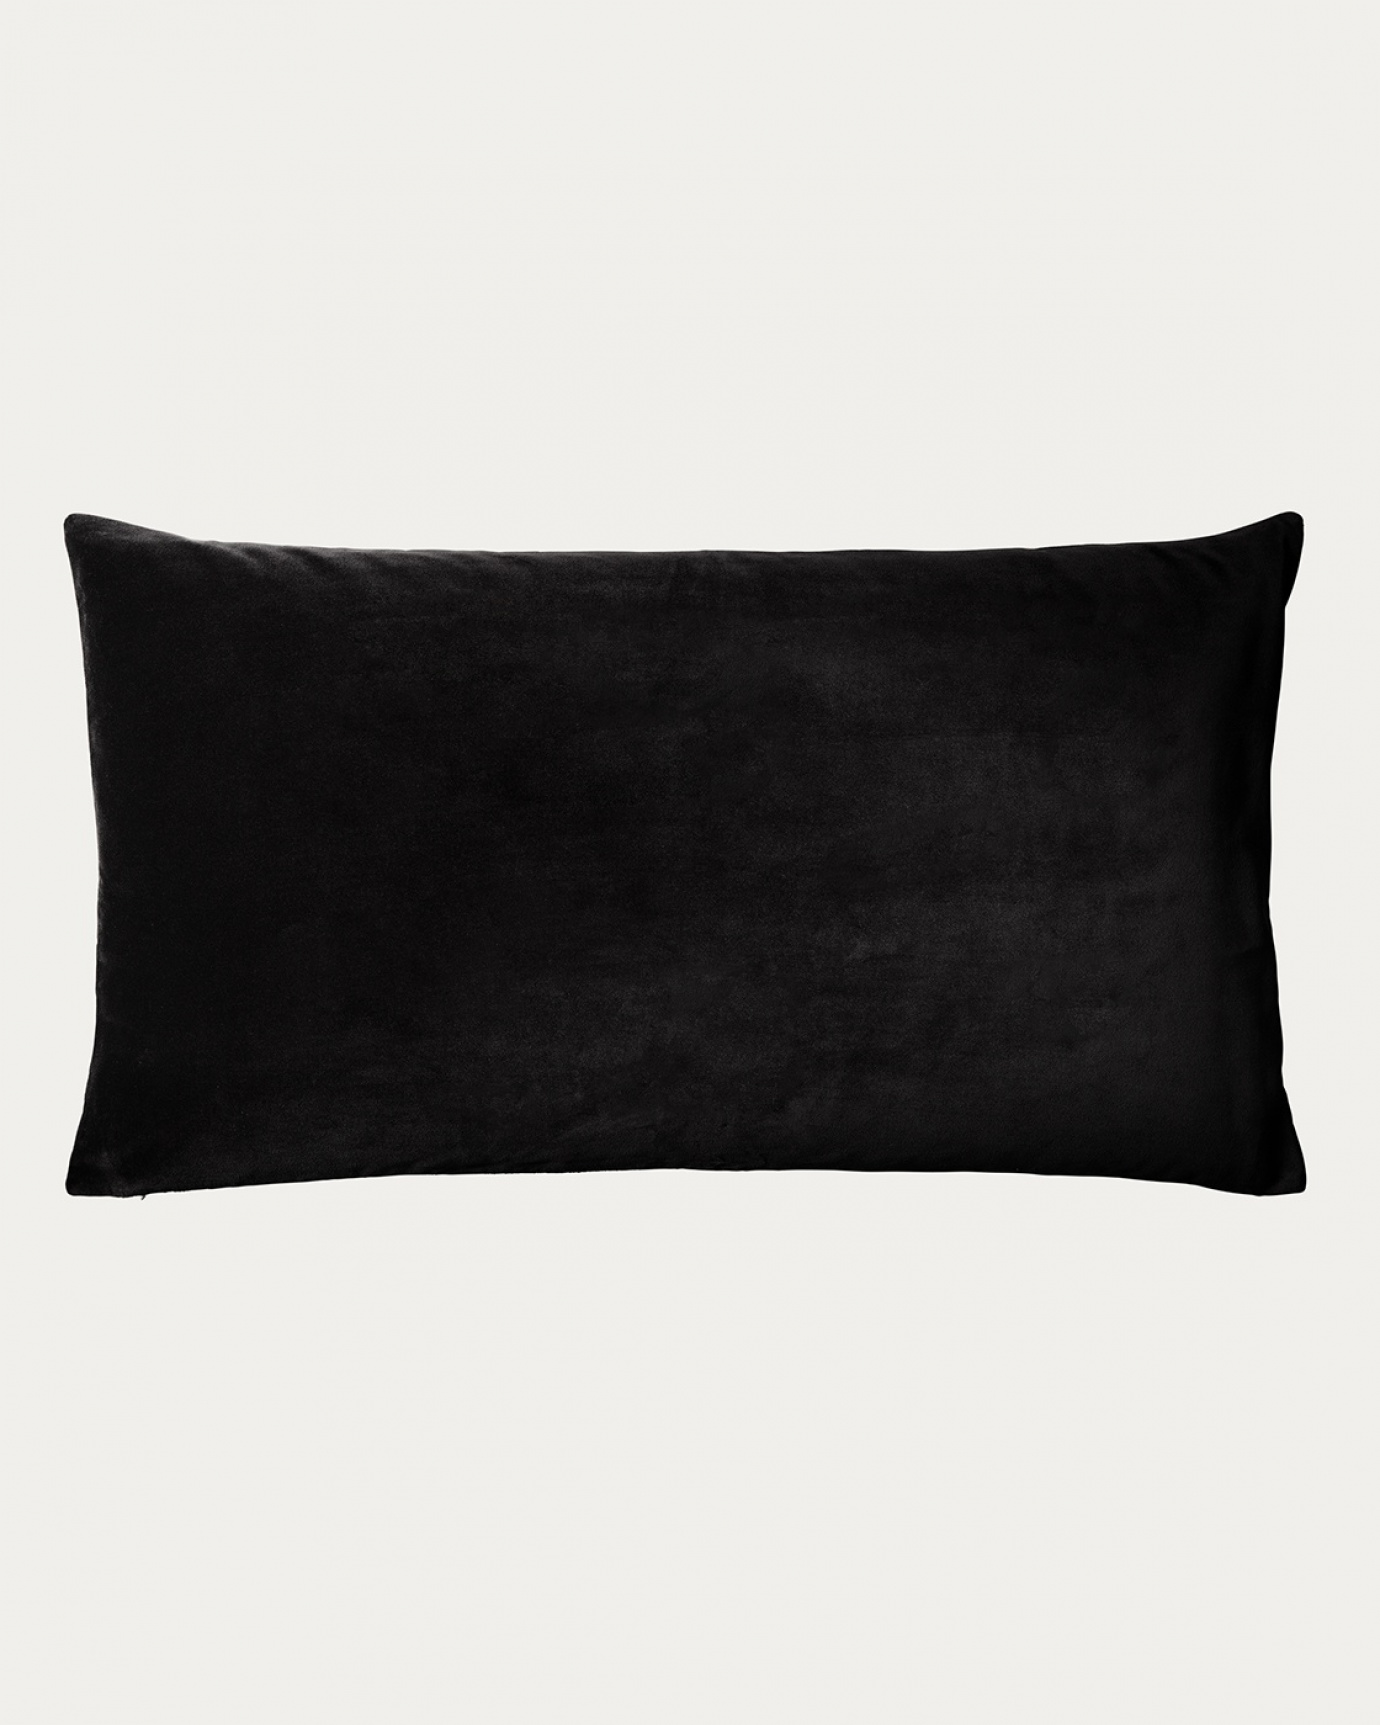 Product image black PAOLO cushion cover made of soft organic cotton velvet and 100% linen from LINUM DESIGN. Size 50x90 cm.